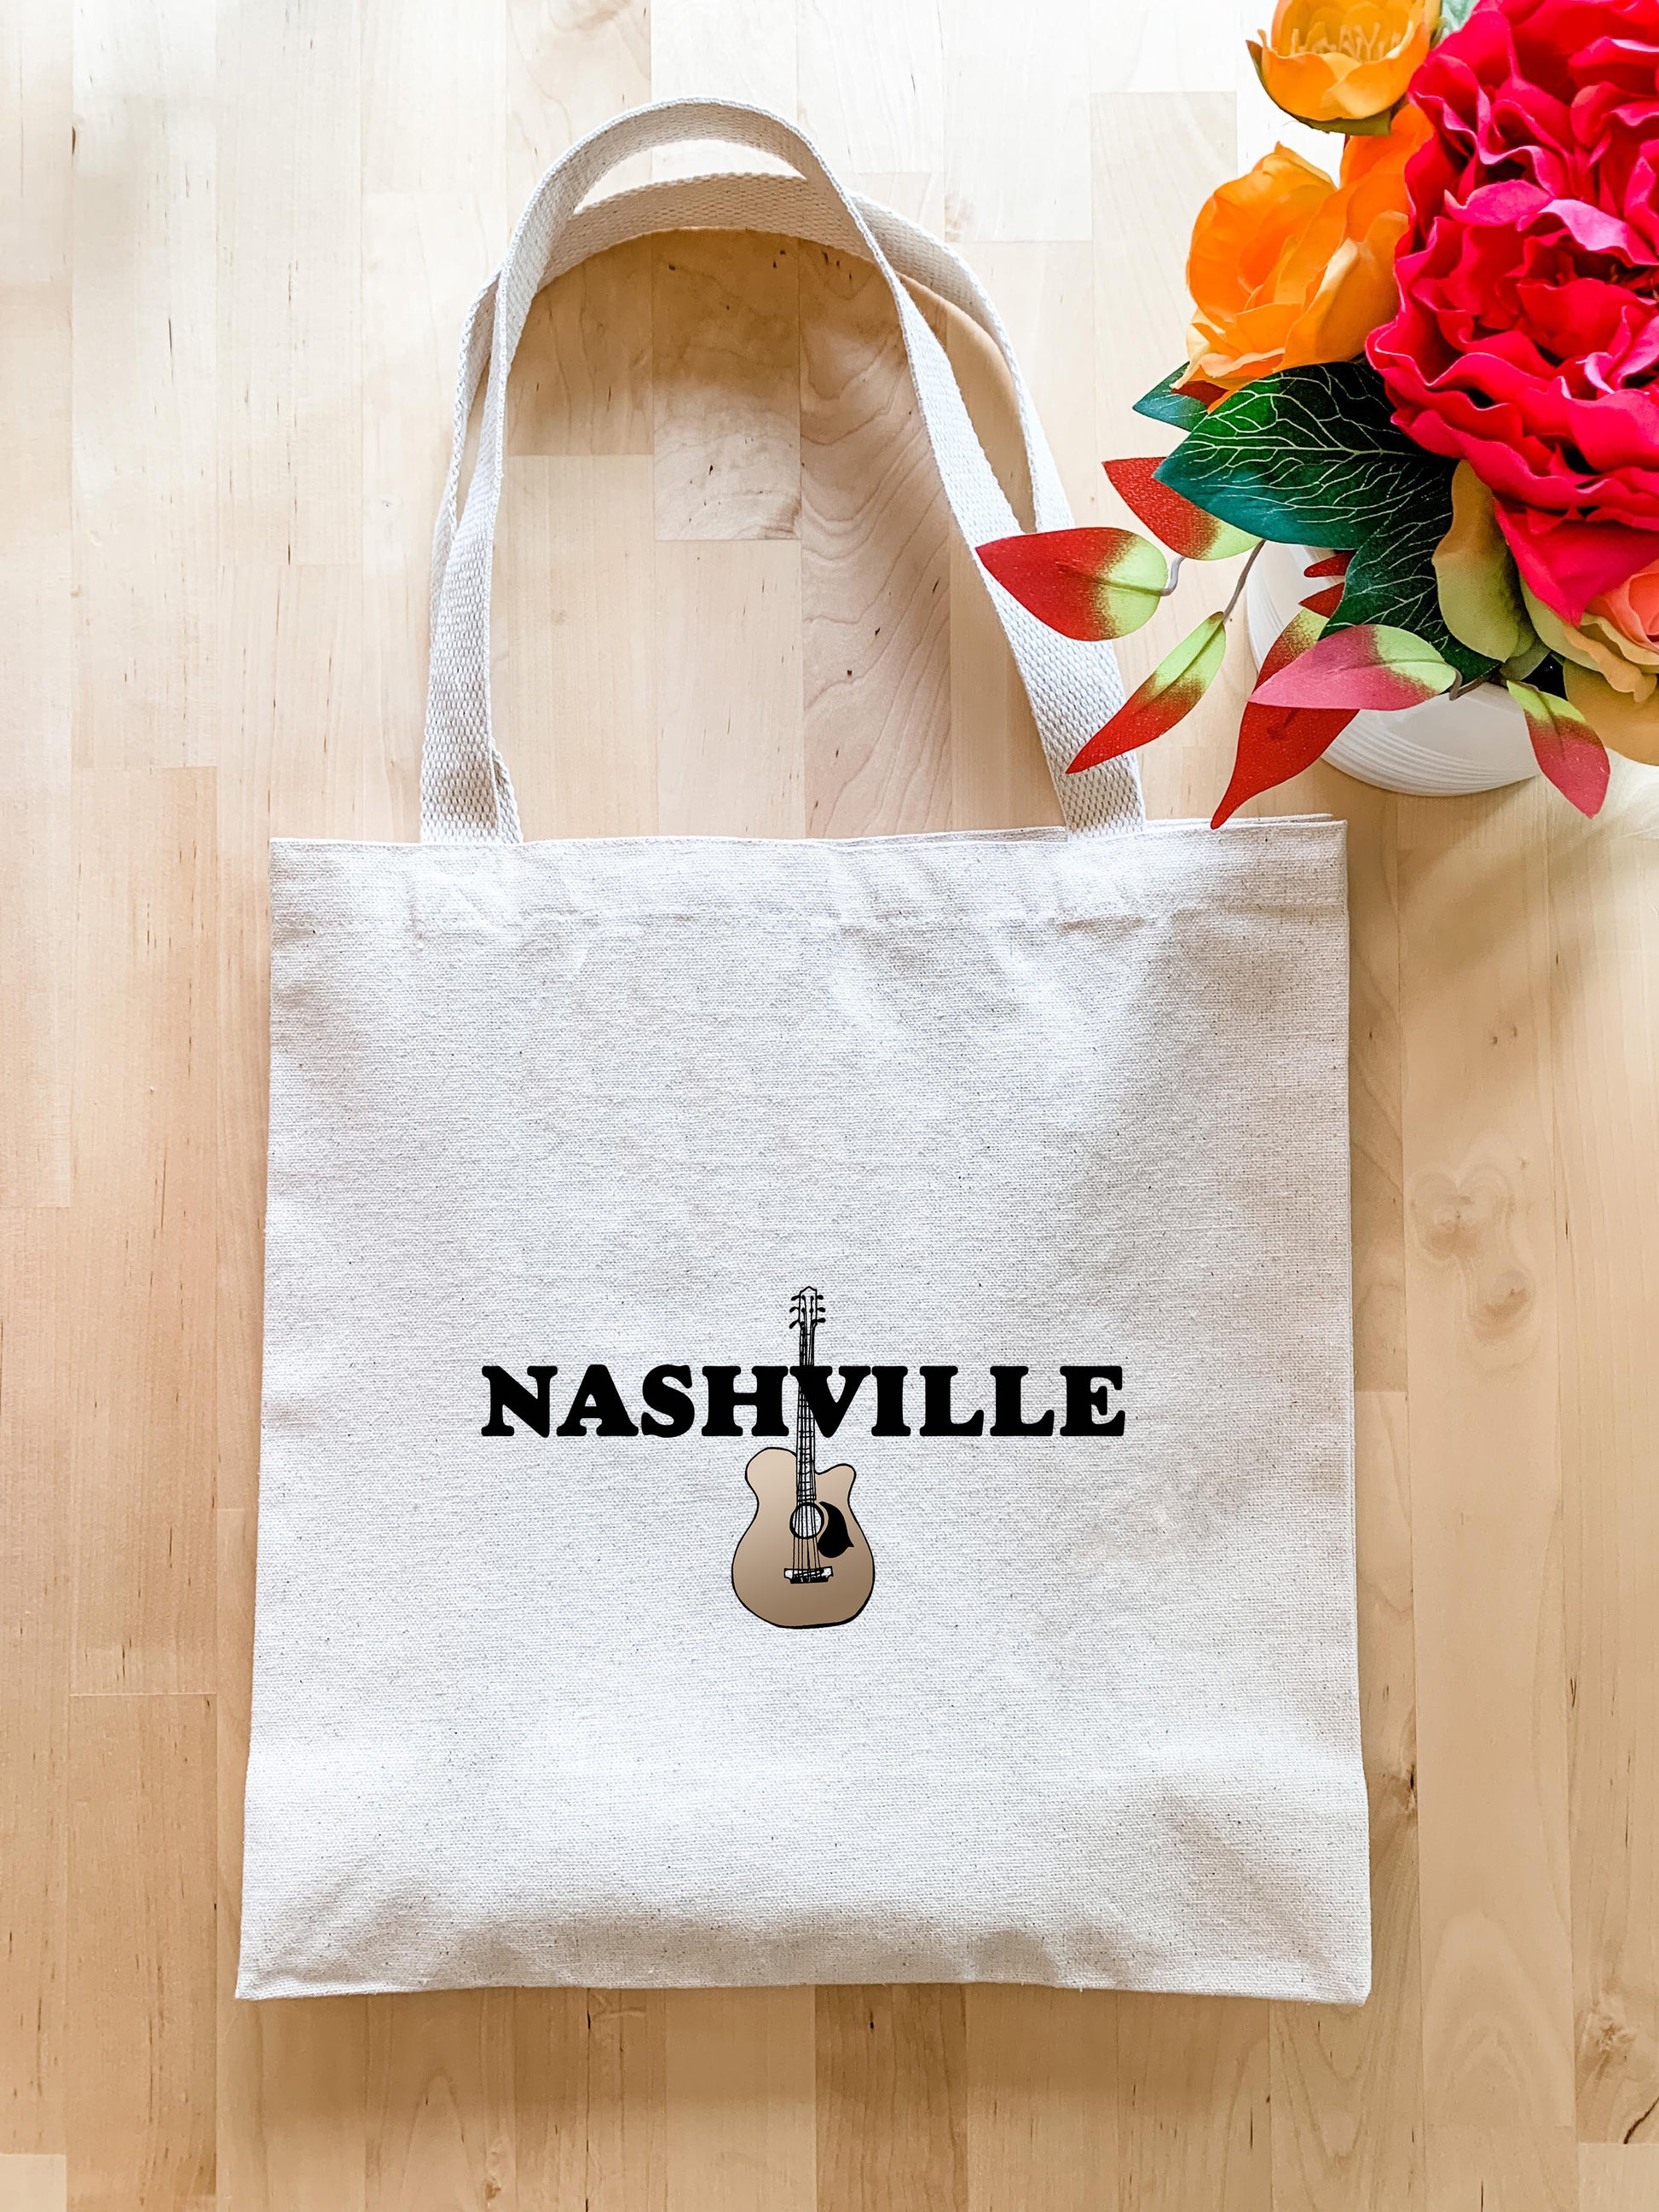 a white bag with nashville on it next to a vase of flowers